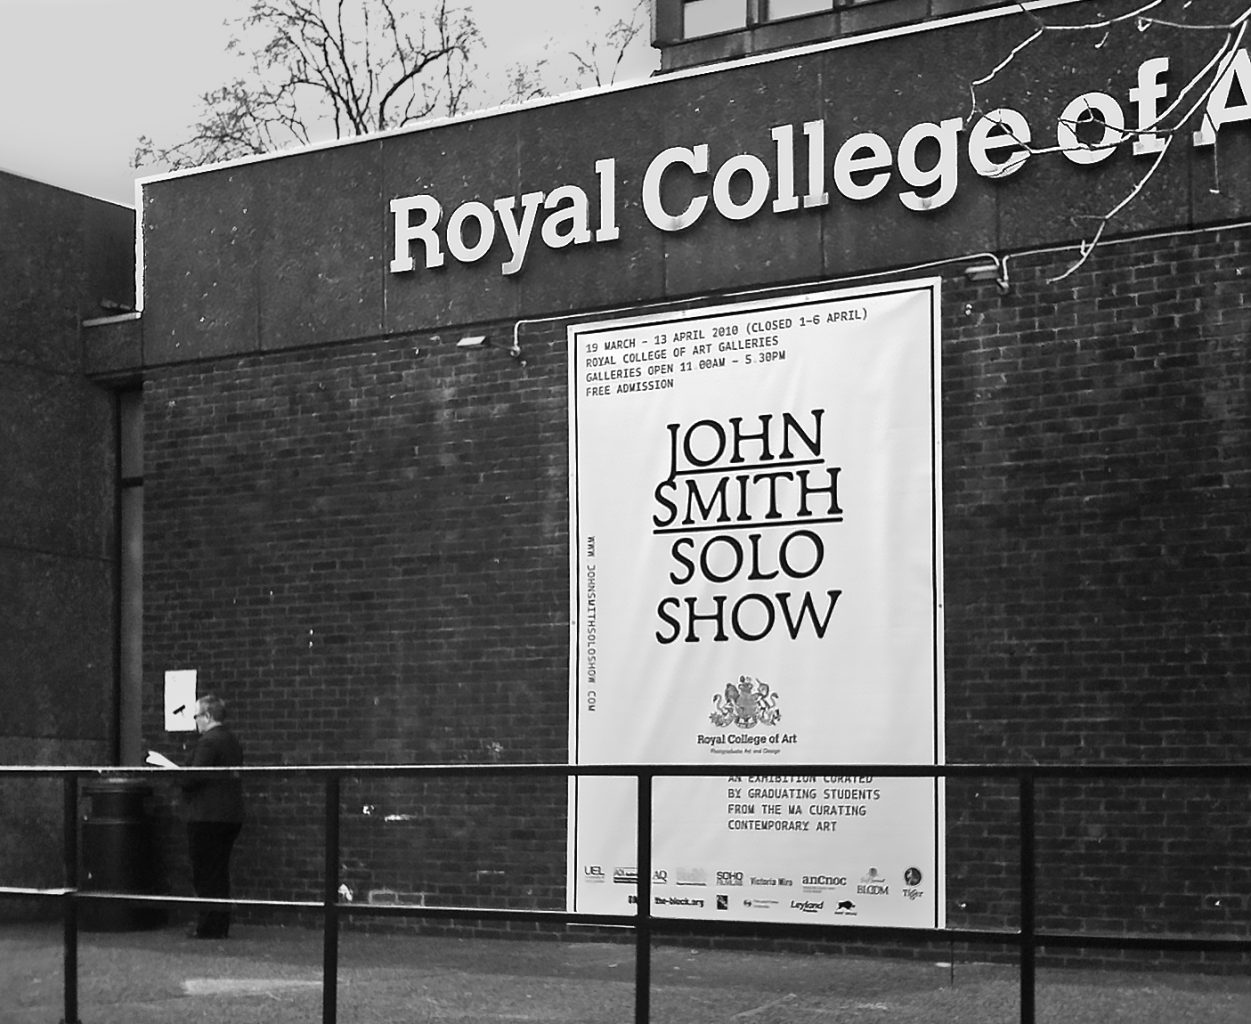 John Smith | Solo Show, exhibition by the Curating Contemporary Art Department of the Royal College of Art, designed by In the shade of a tree studio (founded by Sophie Demay and Maël Fournier Comte) together with Samuel Bonnet.